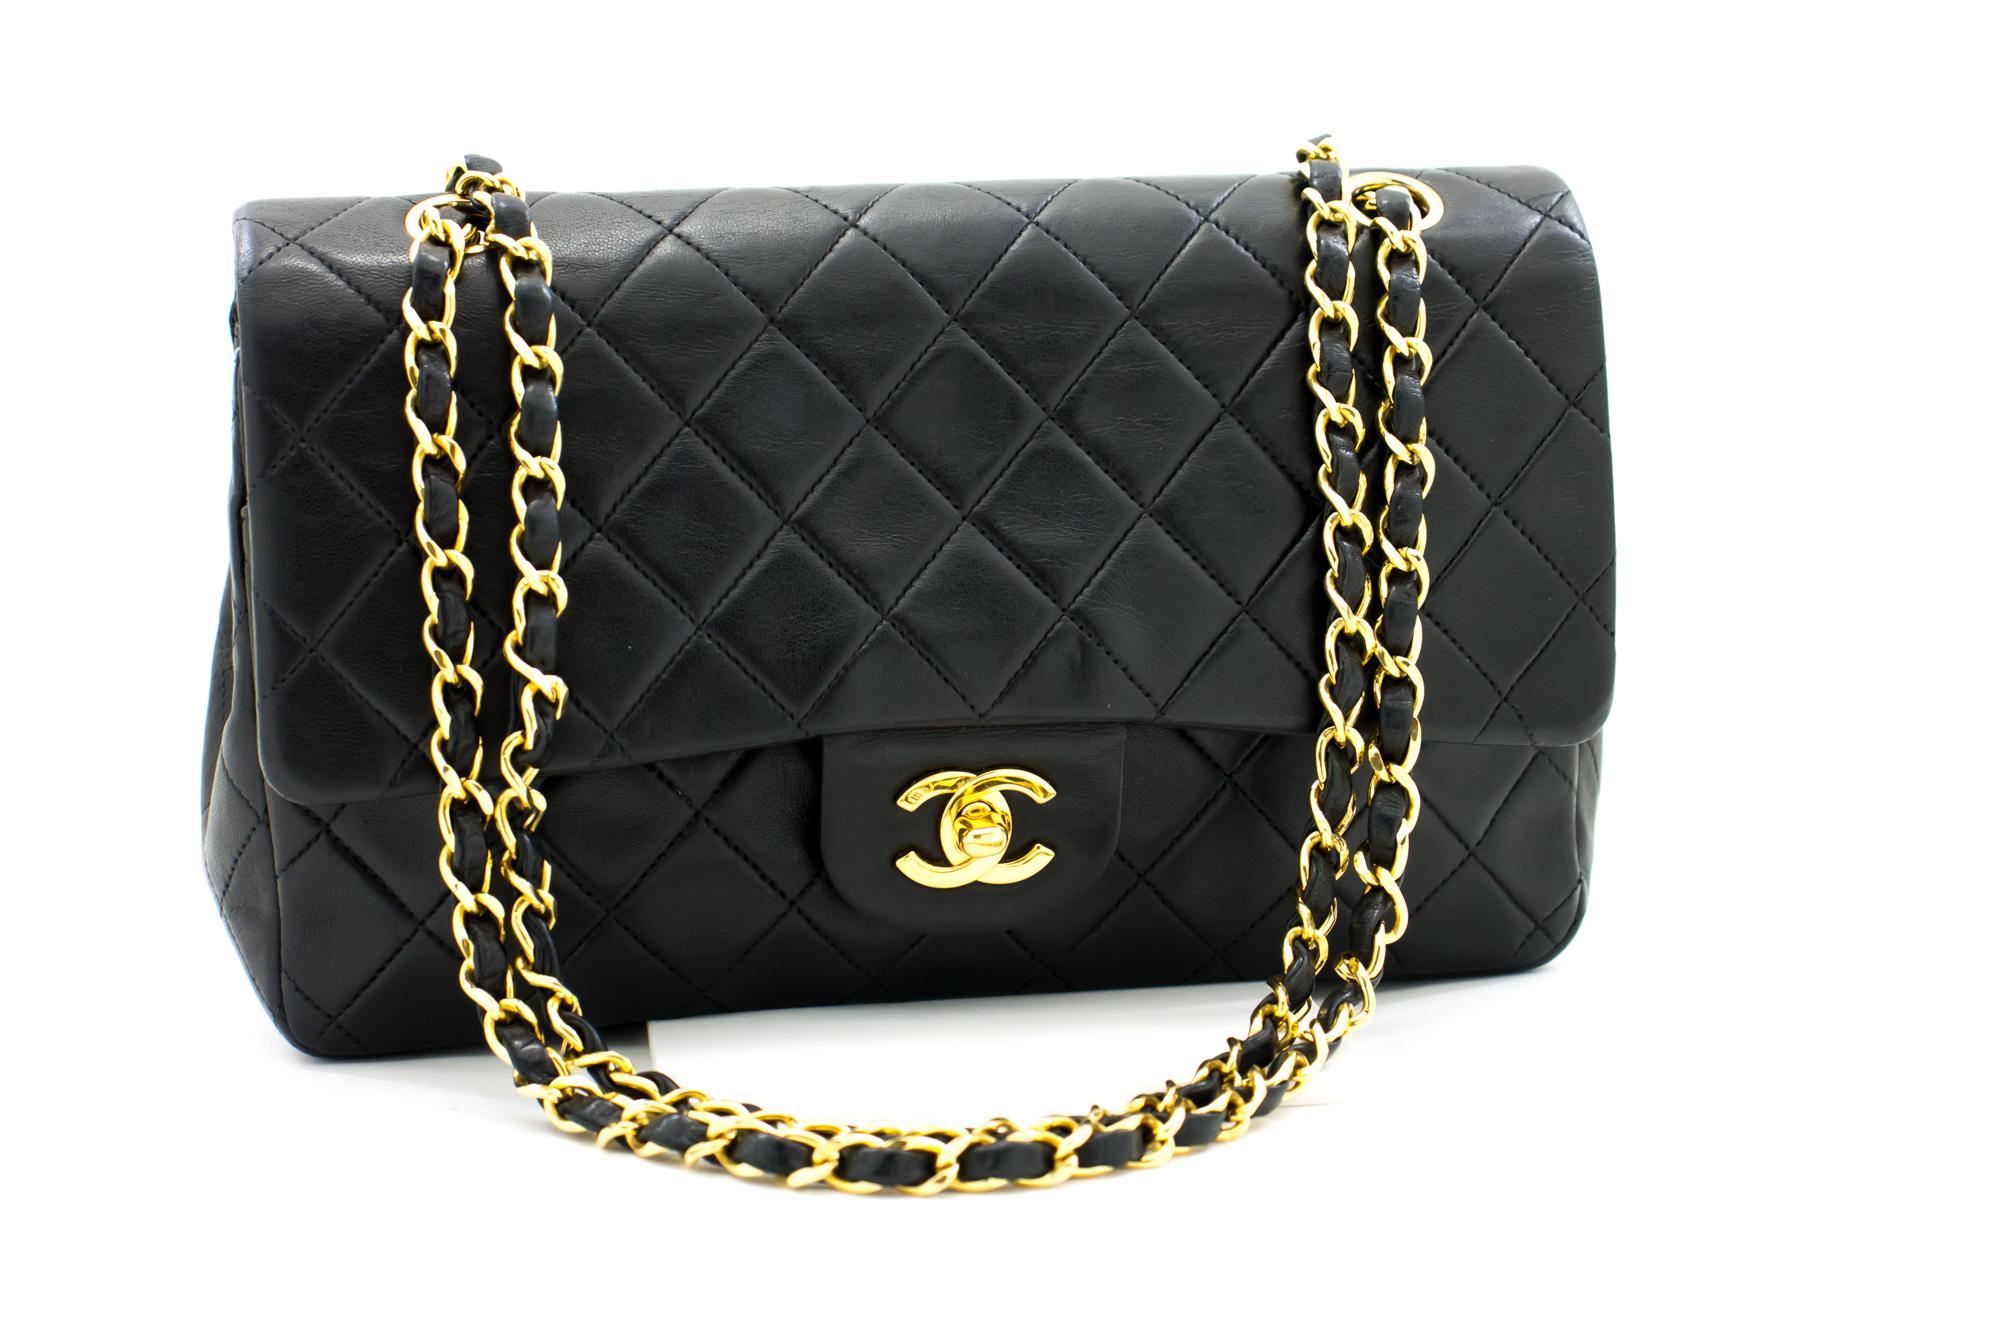 An authentic CHANEL 2.55 Classic Double Flap Chain Shoulder Bag Black made of black Lambskin Handbag. The color is Black. The outside material is Leather. The pattern is Solid. This item is Vintage / Classic. The year of manufacture would be